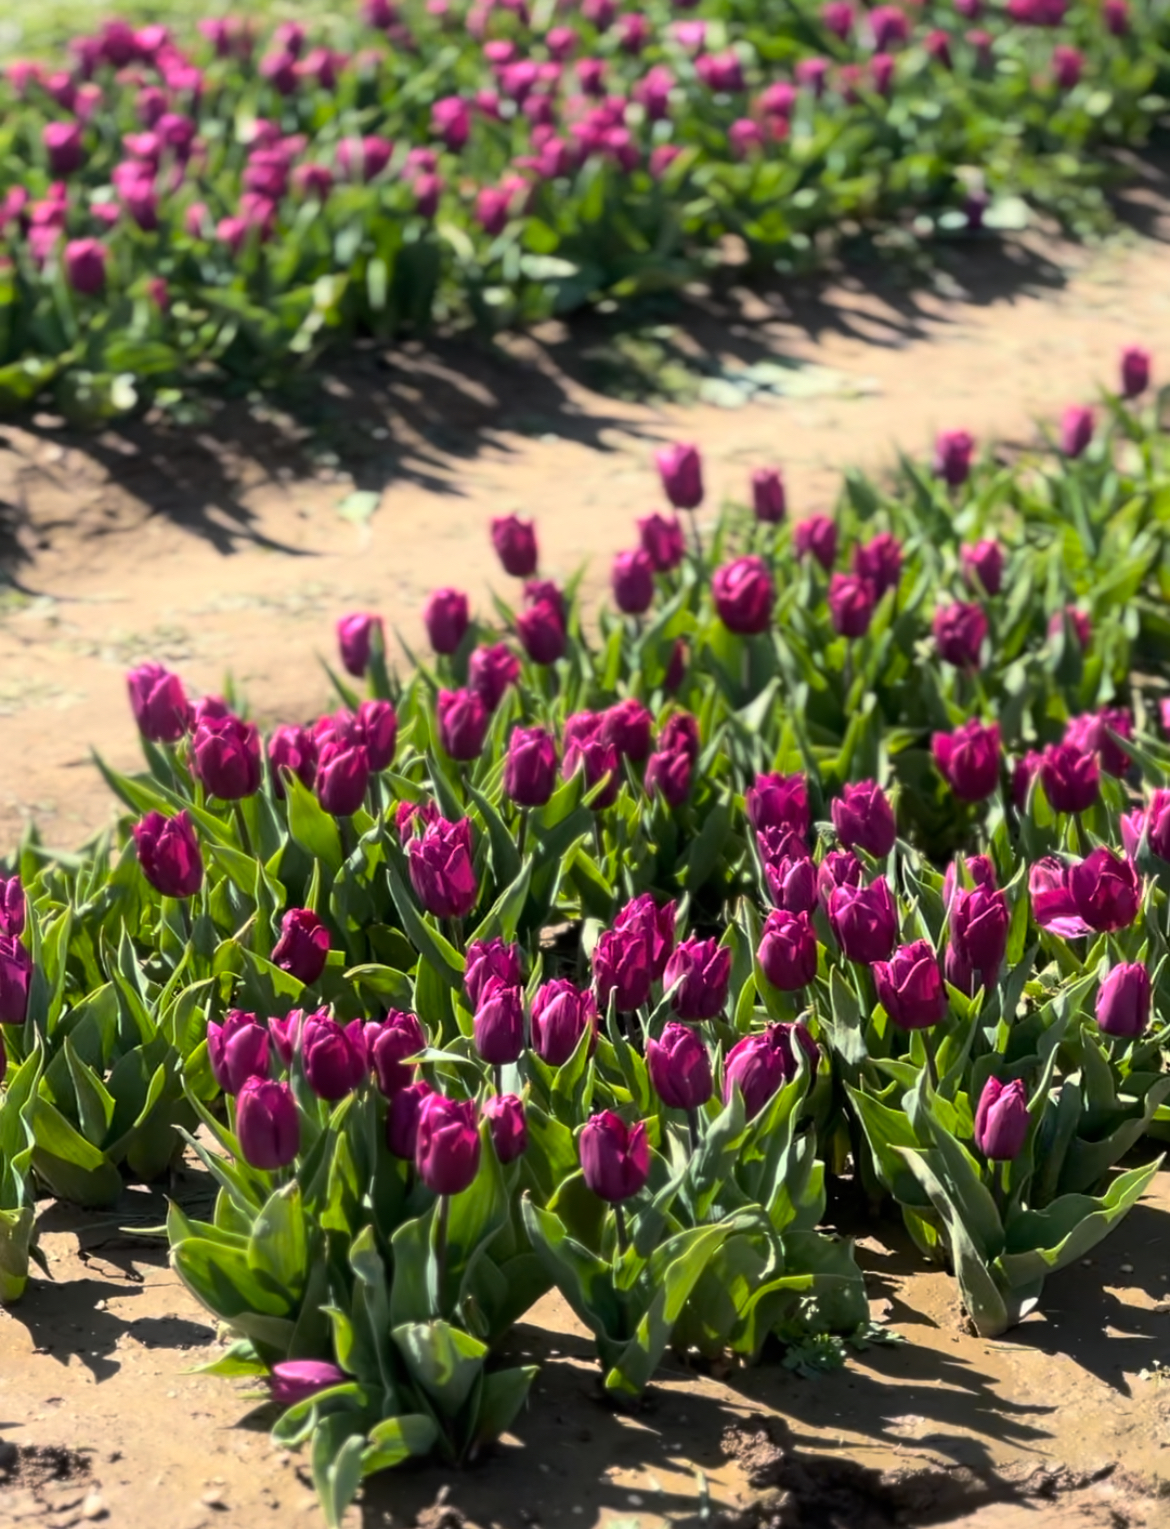 Purple tulips represent royalty and nobility, these from Holland Ridge Farm visit